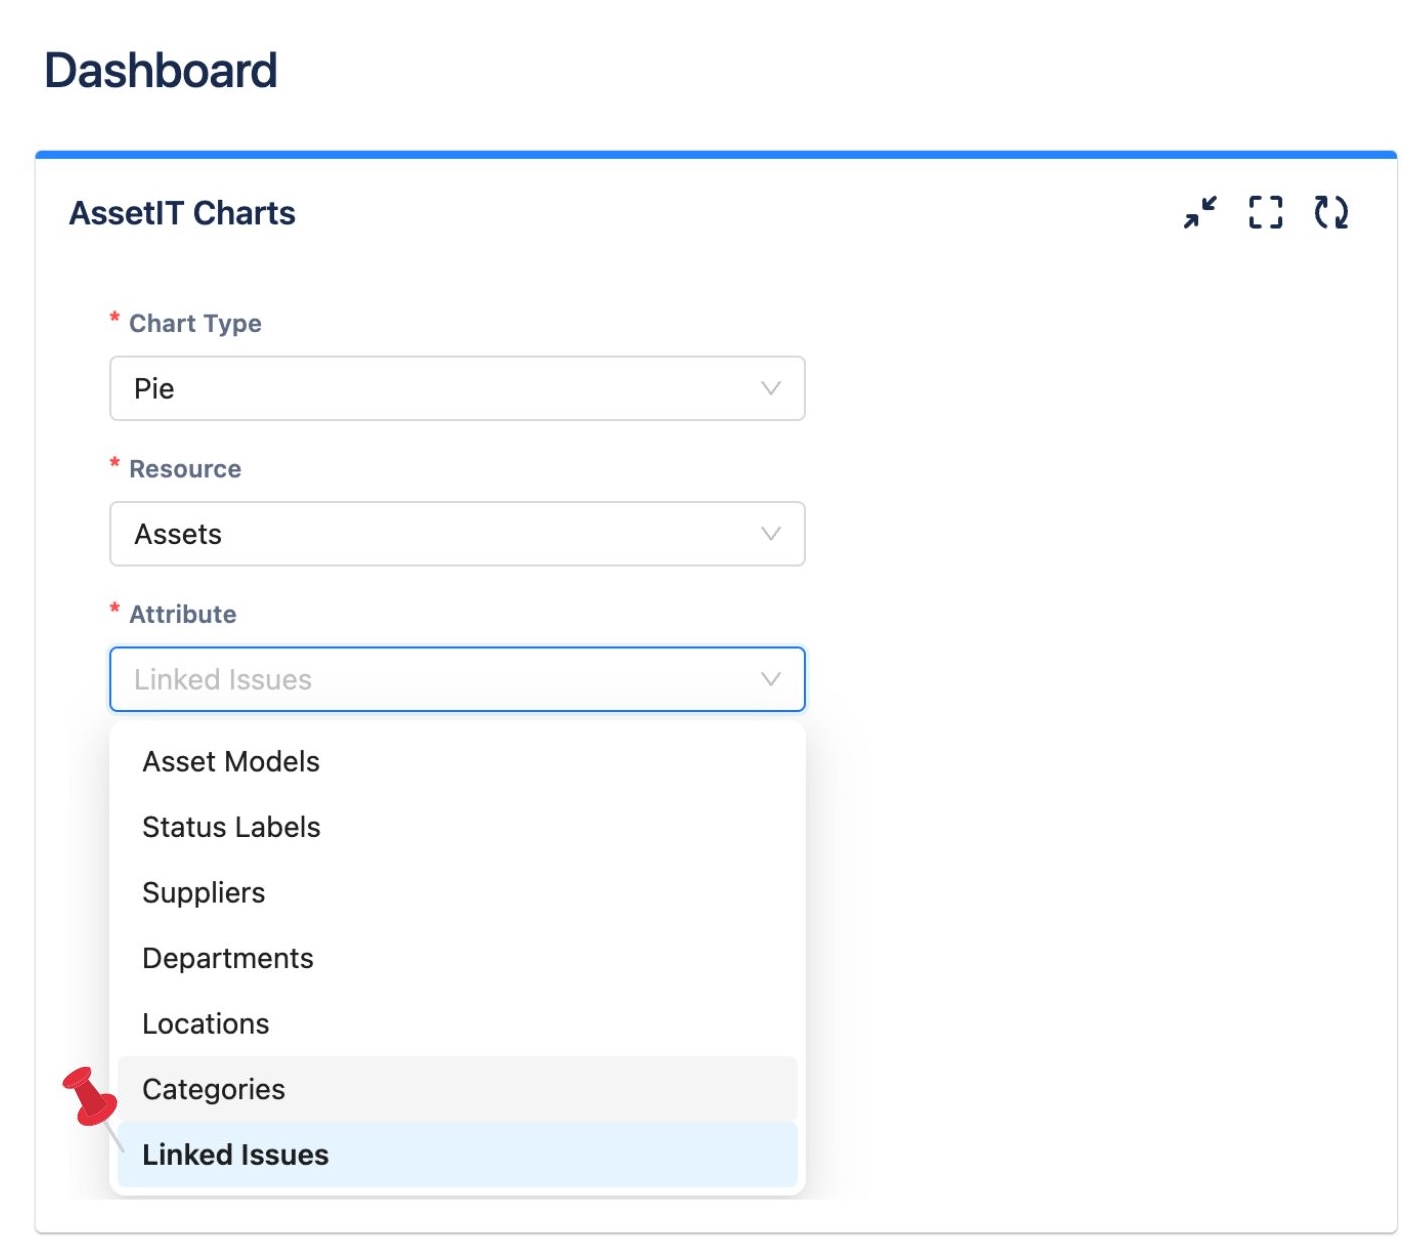 AssetIT 1.4.5-AC - Linked issues display in Jira gadget